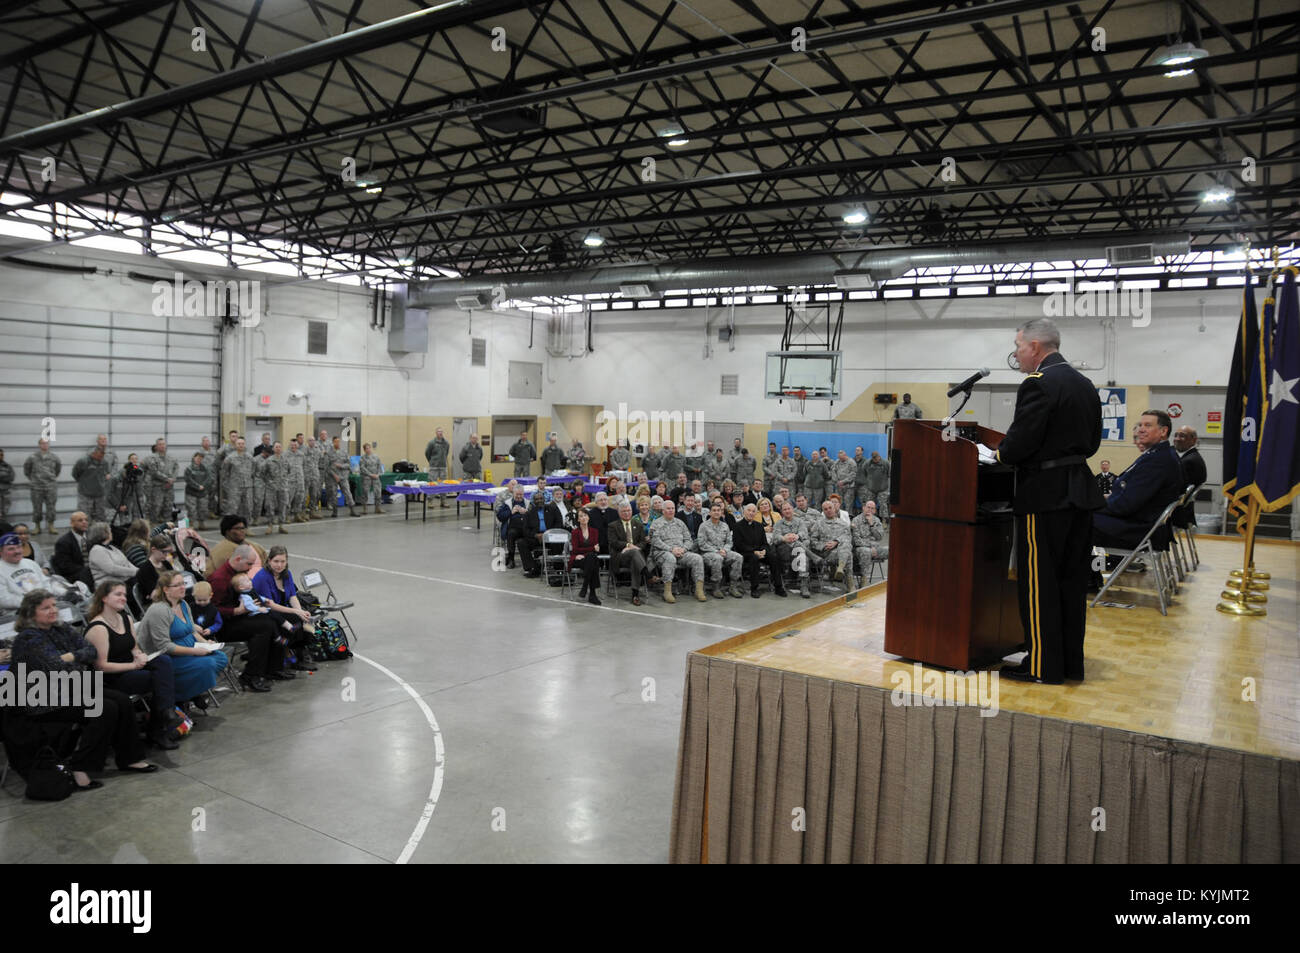 Army Brig. Gen. David. E. Graetz, assistant to the Army chief of chaplains as the National Guard liaison, speaks to the audience at his promotion ceremony at the Maj. Gen. Billy G.  Wellman Armory at Boone National Guard Center in Frankfort, Ky., Jan. 11, 2015. Graetz has served as a chaplain for 34 years with most of his time spent in the Kentucky Army National Guard. Stock Photo